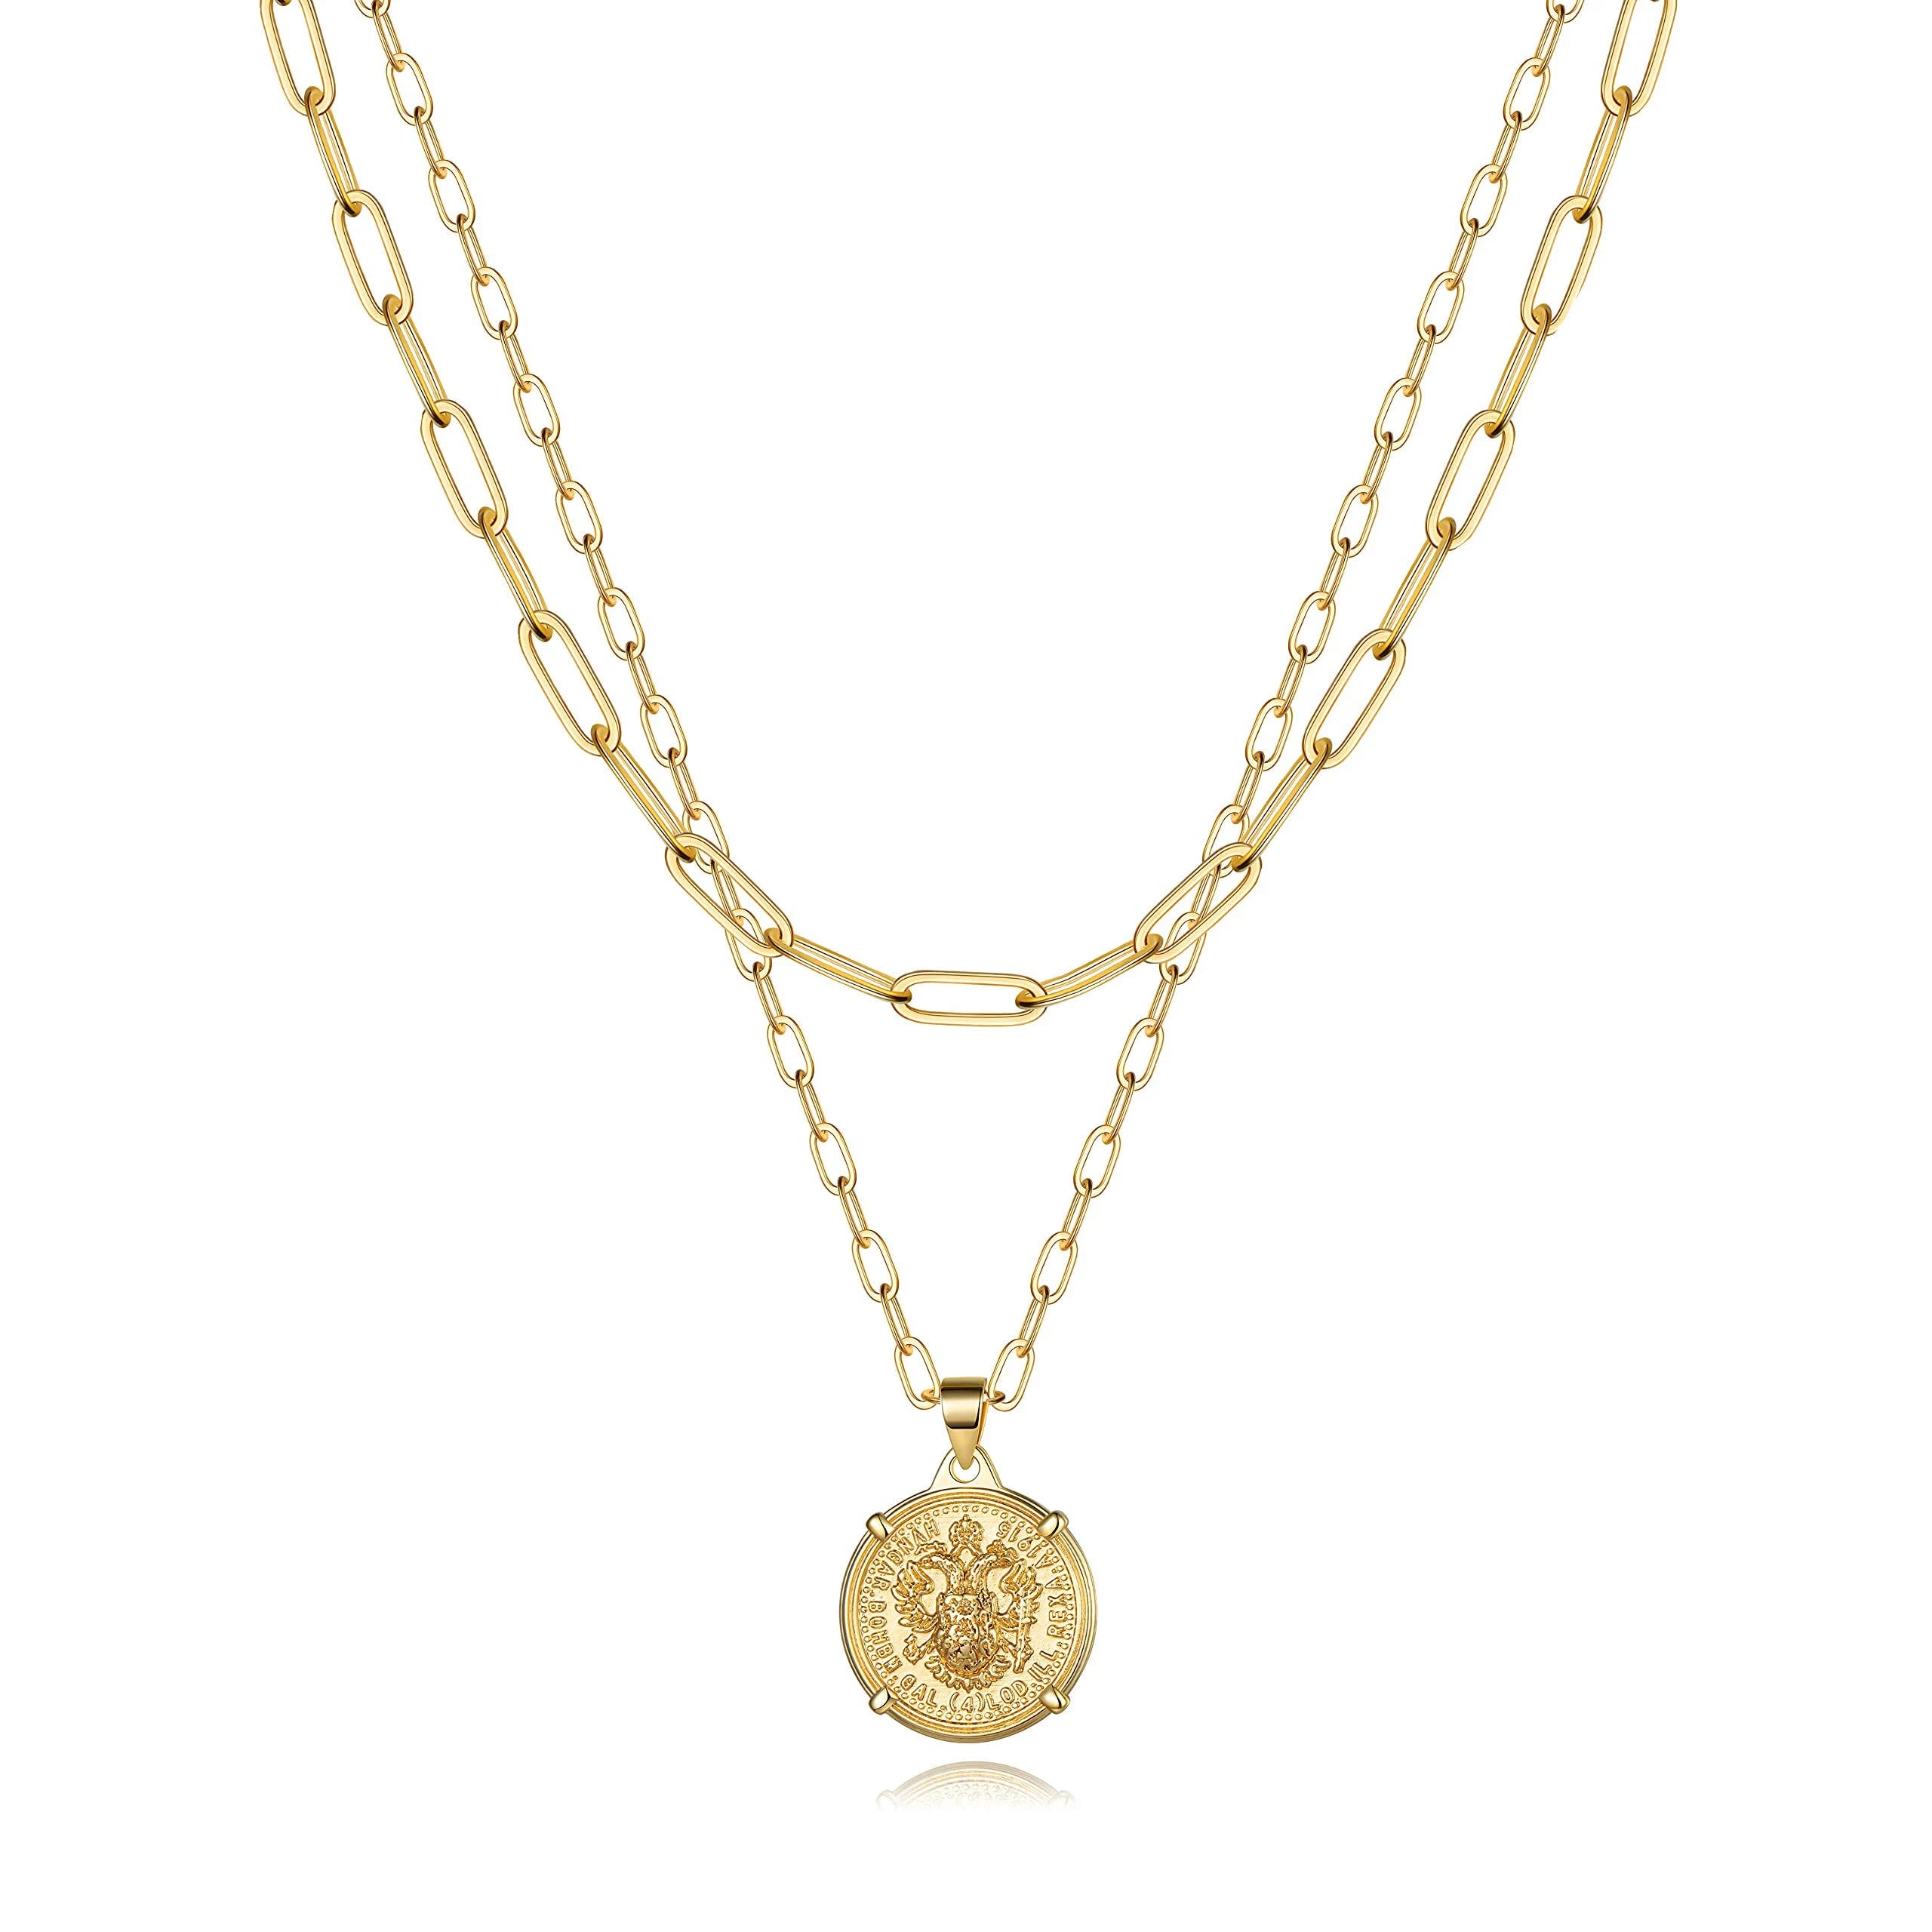 Layered Link Chain Choker Necklace with 14K Gold Coin Pendant | Image